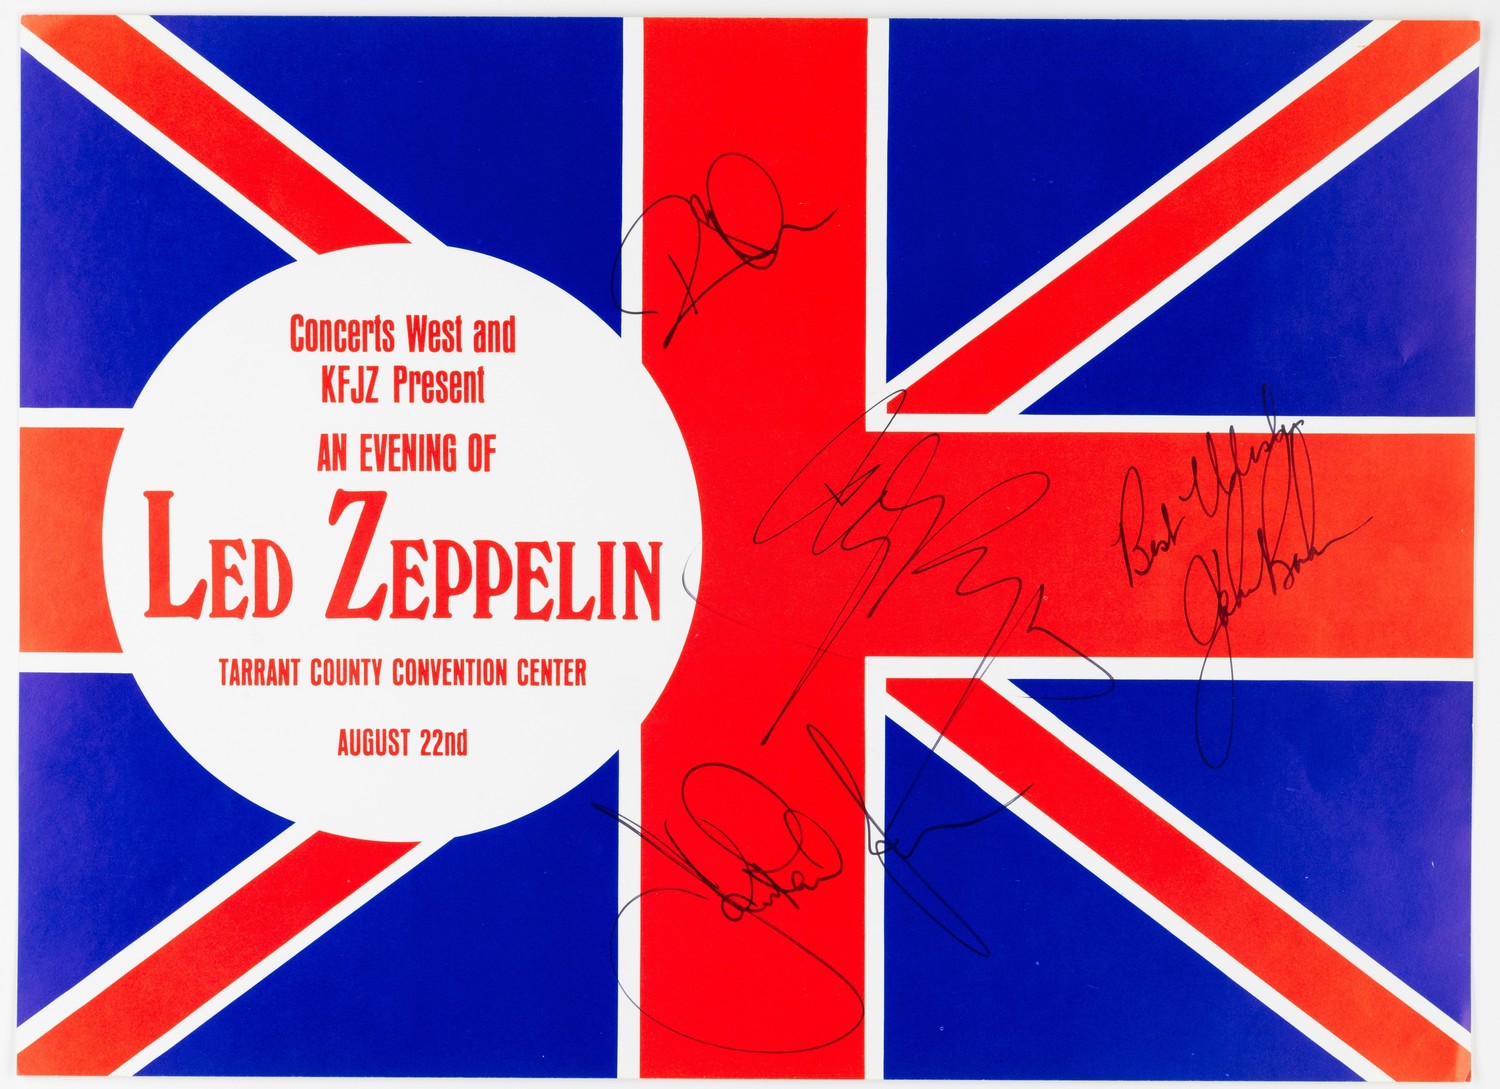 August 22, 1970, Fort Worth TX, US Tarrant County Convention Center Handbil signed by Led Zeppelin